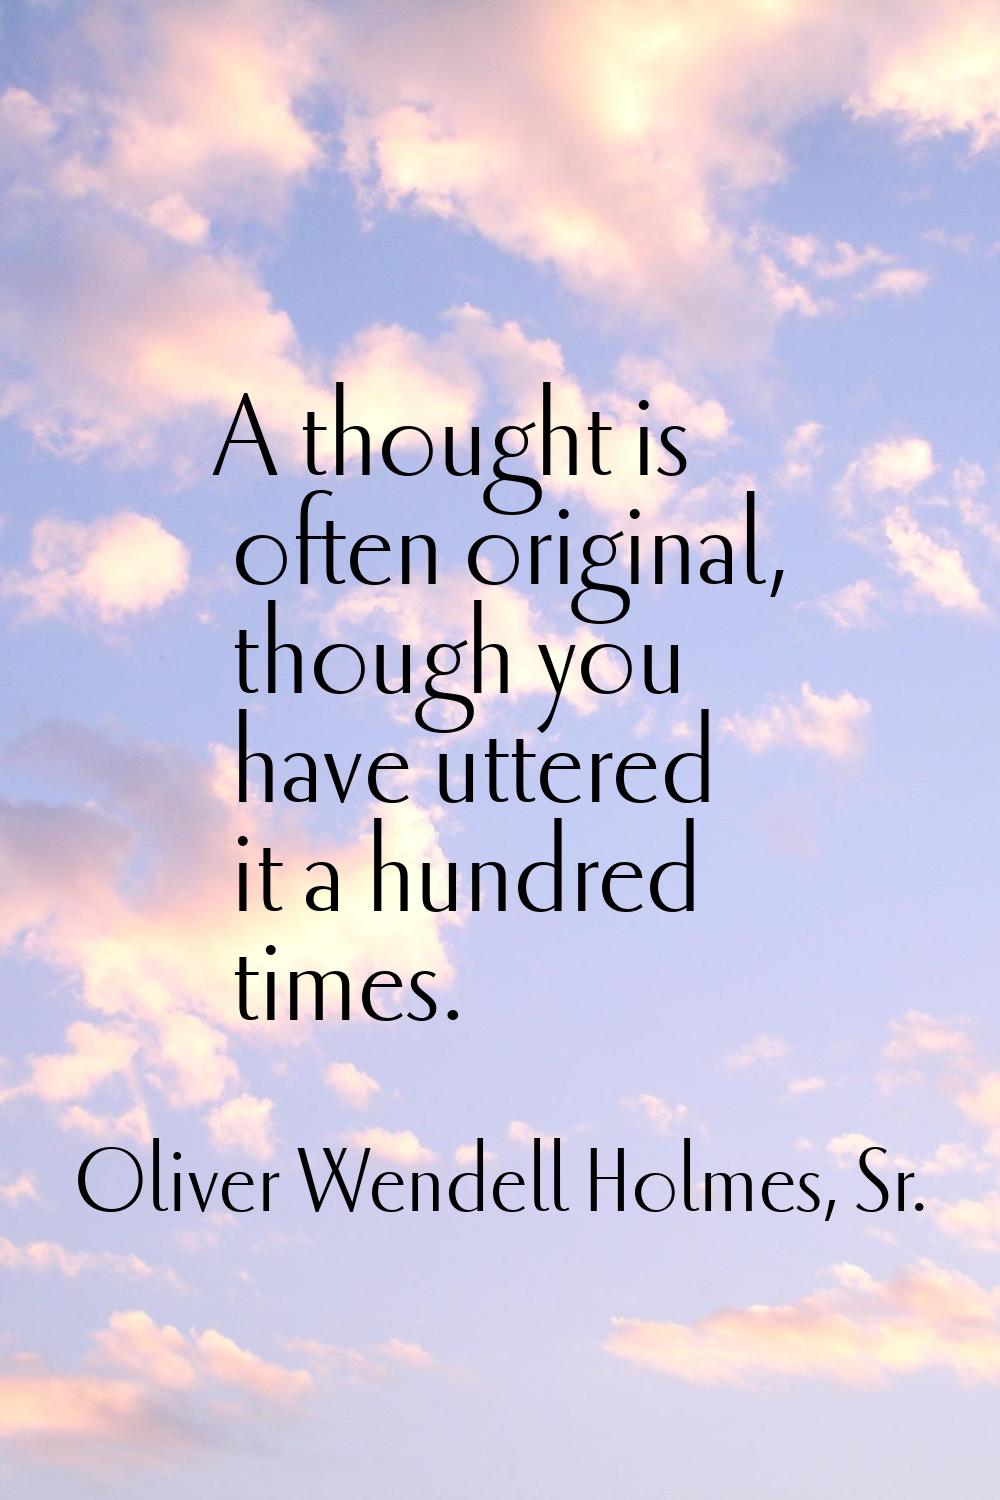 A thought is often original, though you have uttered it a hundred times.